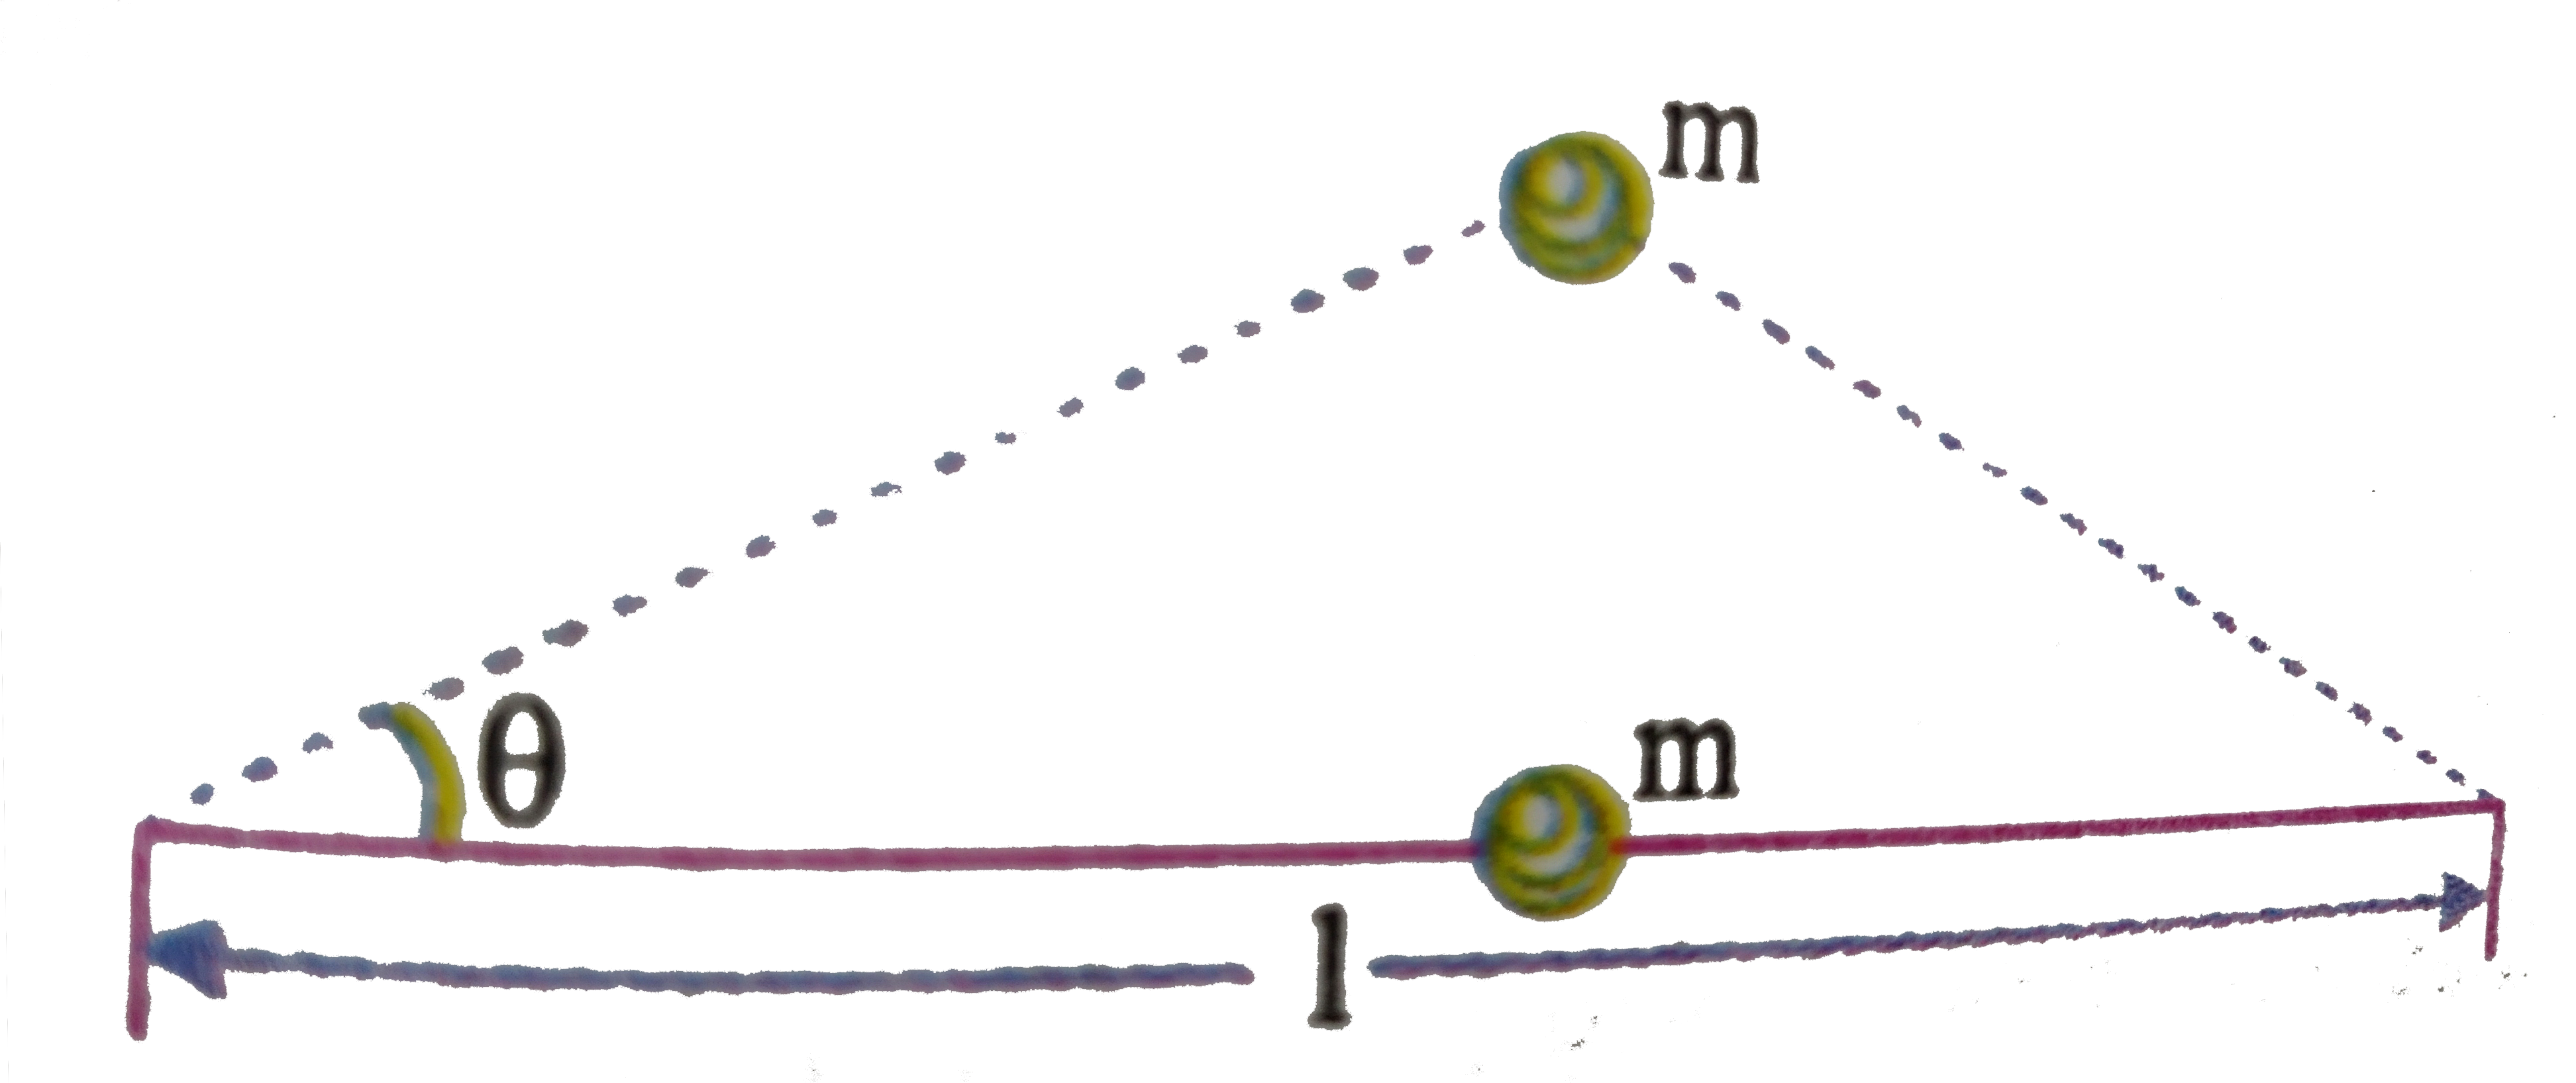 A string secured  at its ends is stretched with a force of tension F. The mass of the string and the force of gravity can be neglected. A point weight with a mass m is attached to the middle of the string. The time period of small oscillations of the weight is 2pi sqrt((ml)/(xF)). the value of x is   (Neglect any change in the magnitude of tension of the string during oscillations)